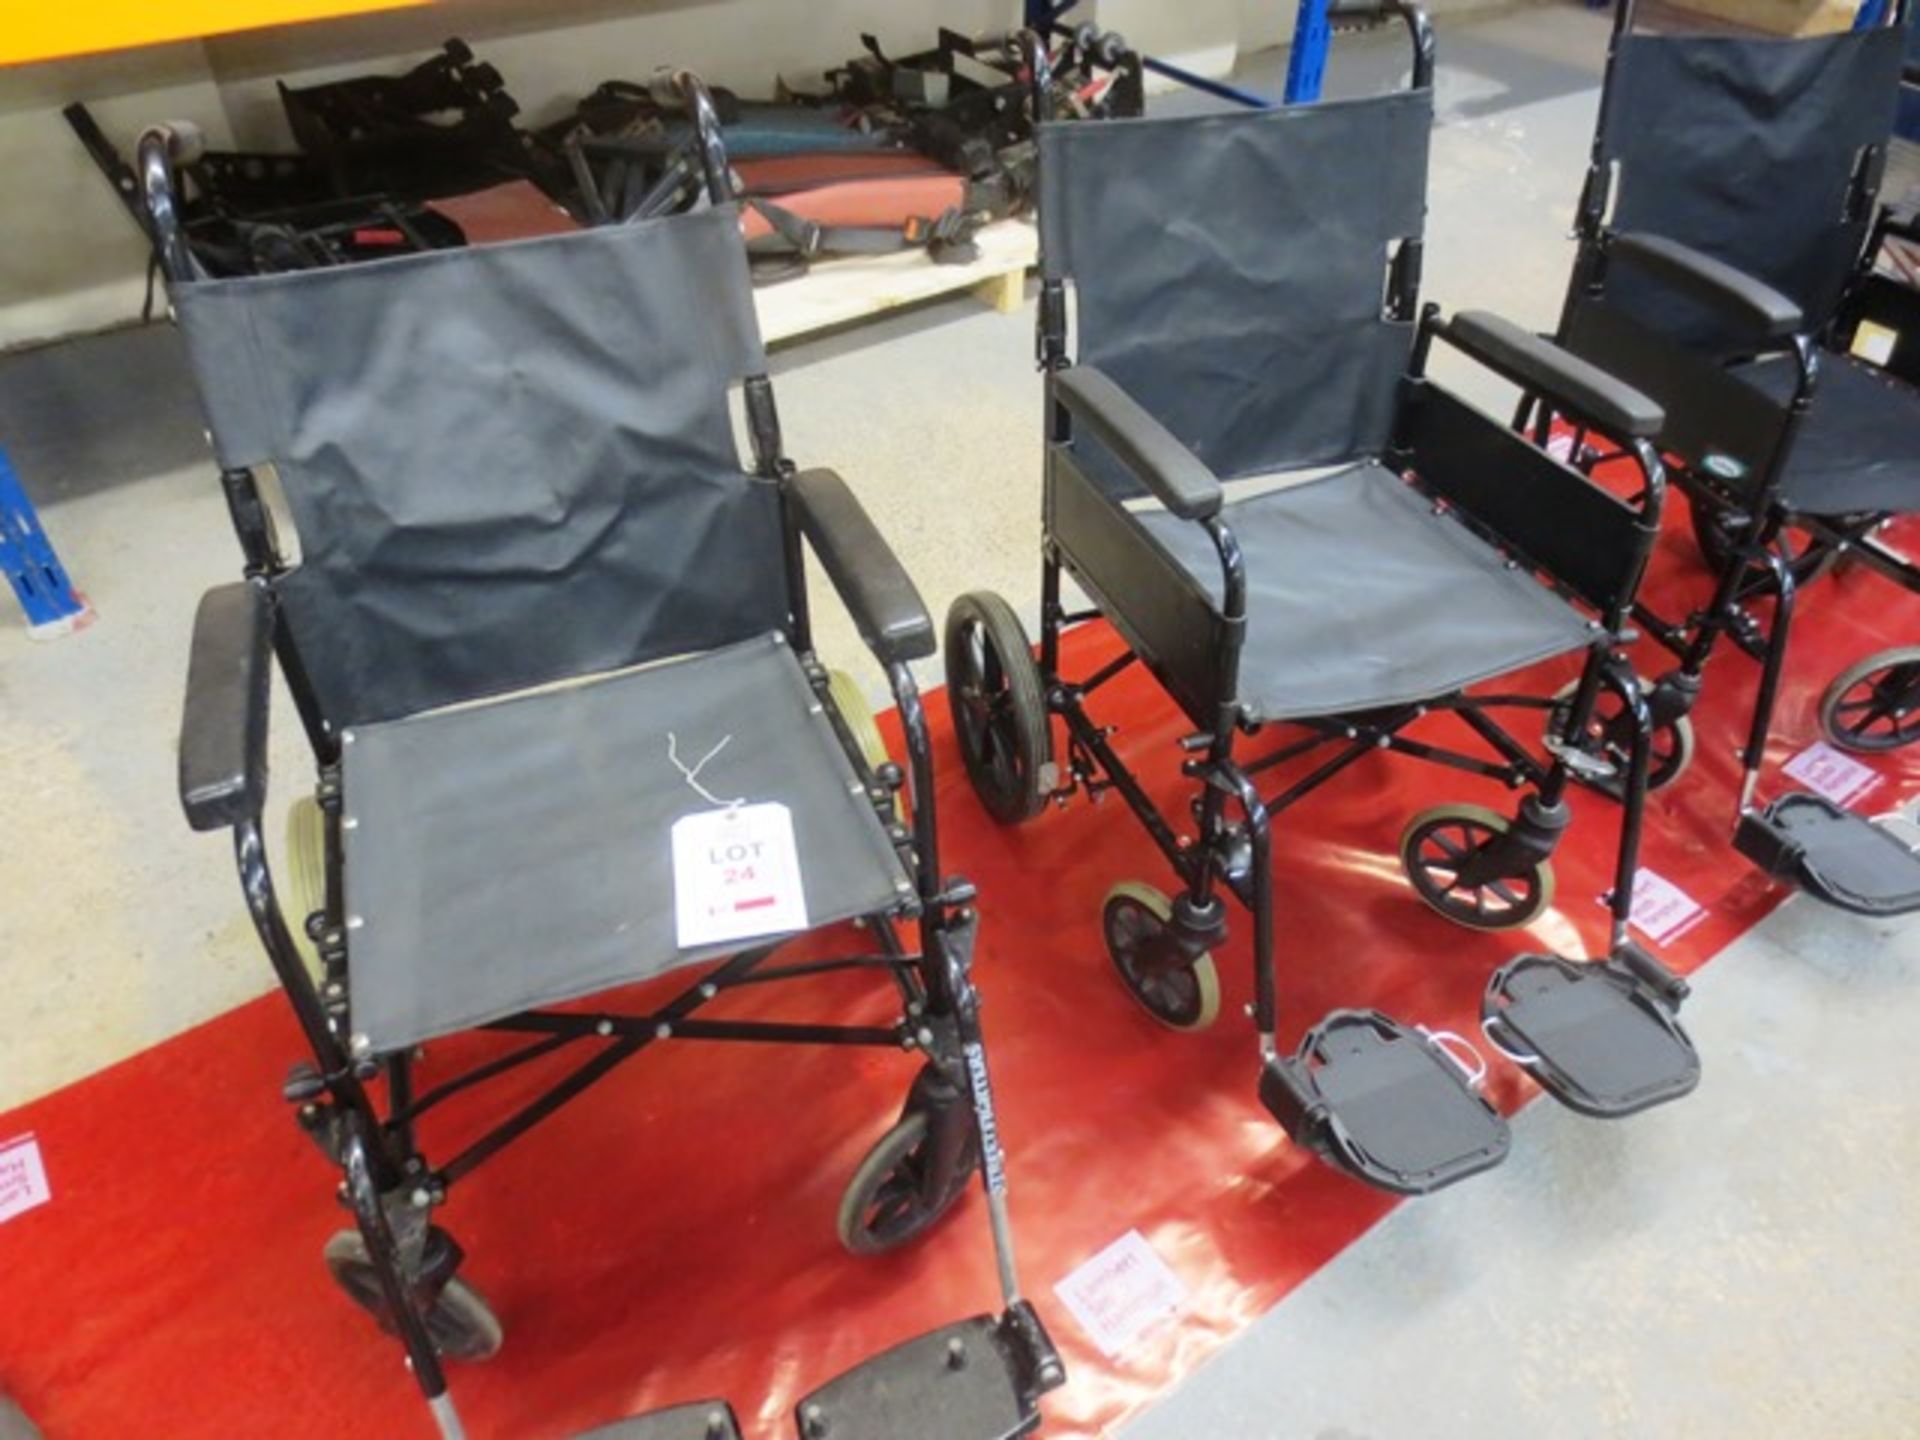 Two assorted collapsible wheelchairs